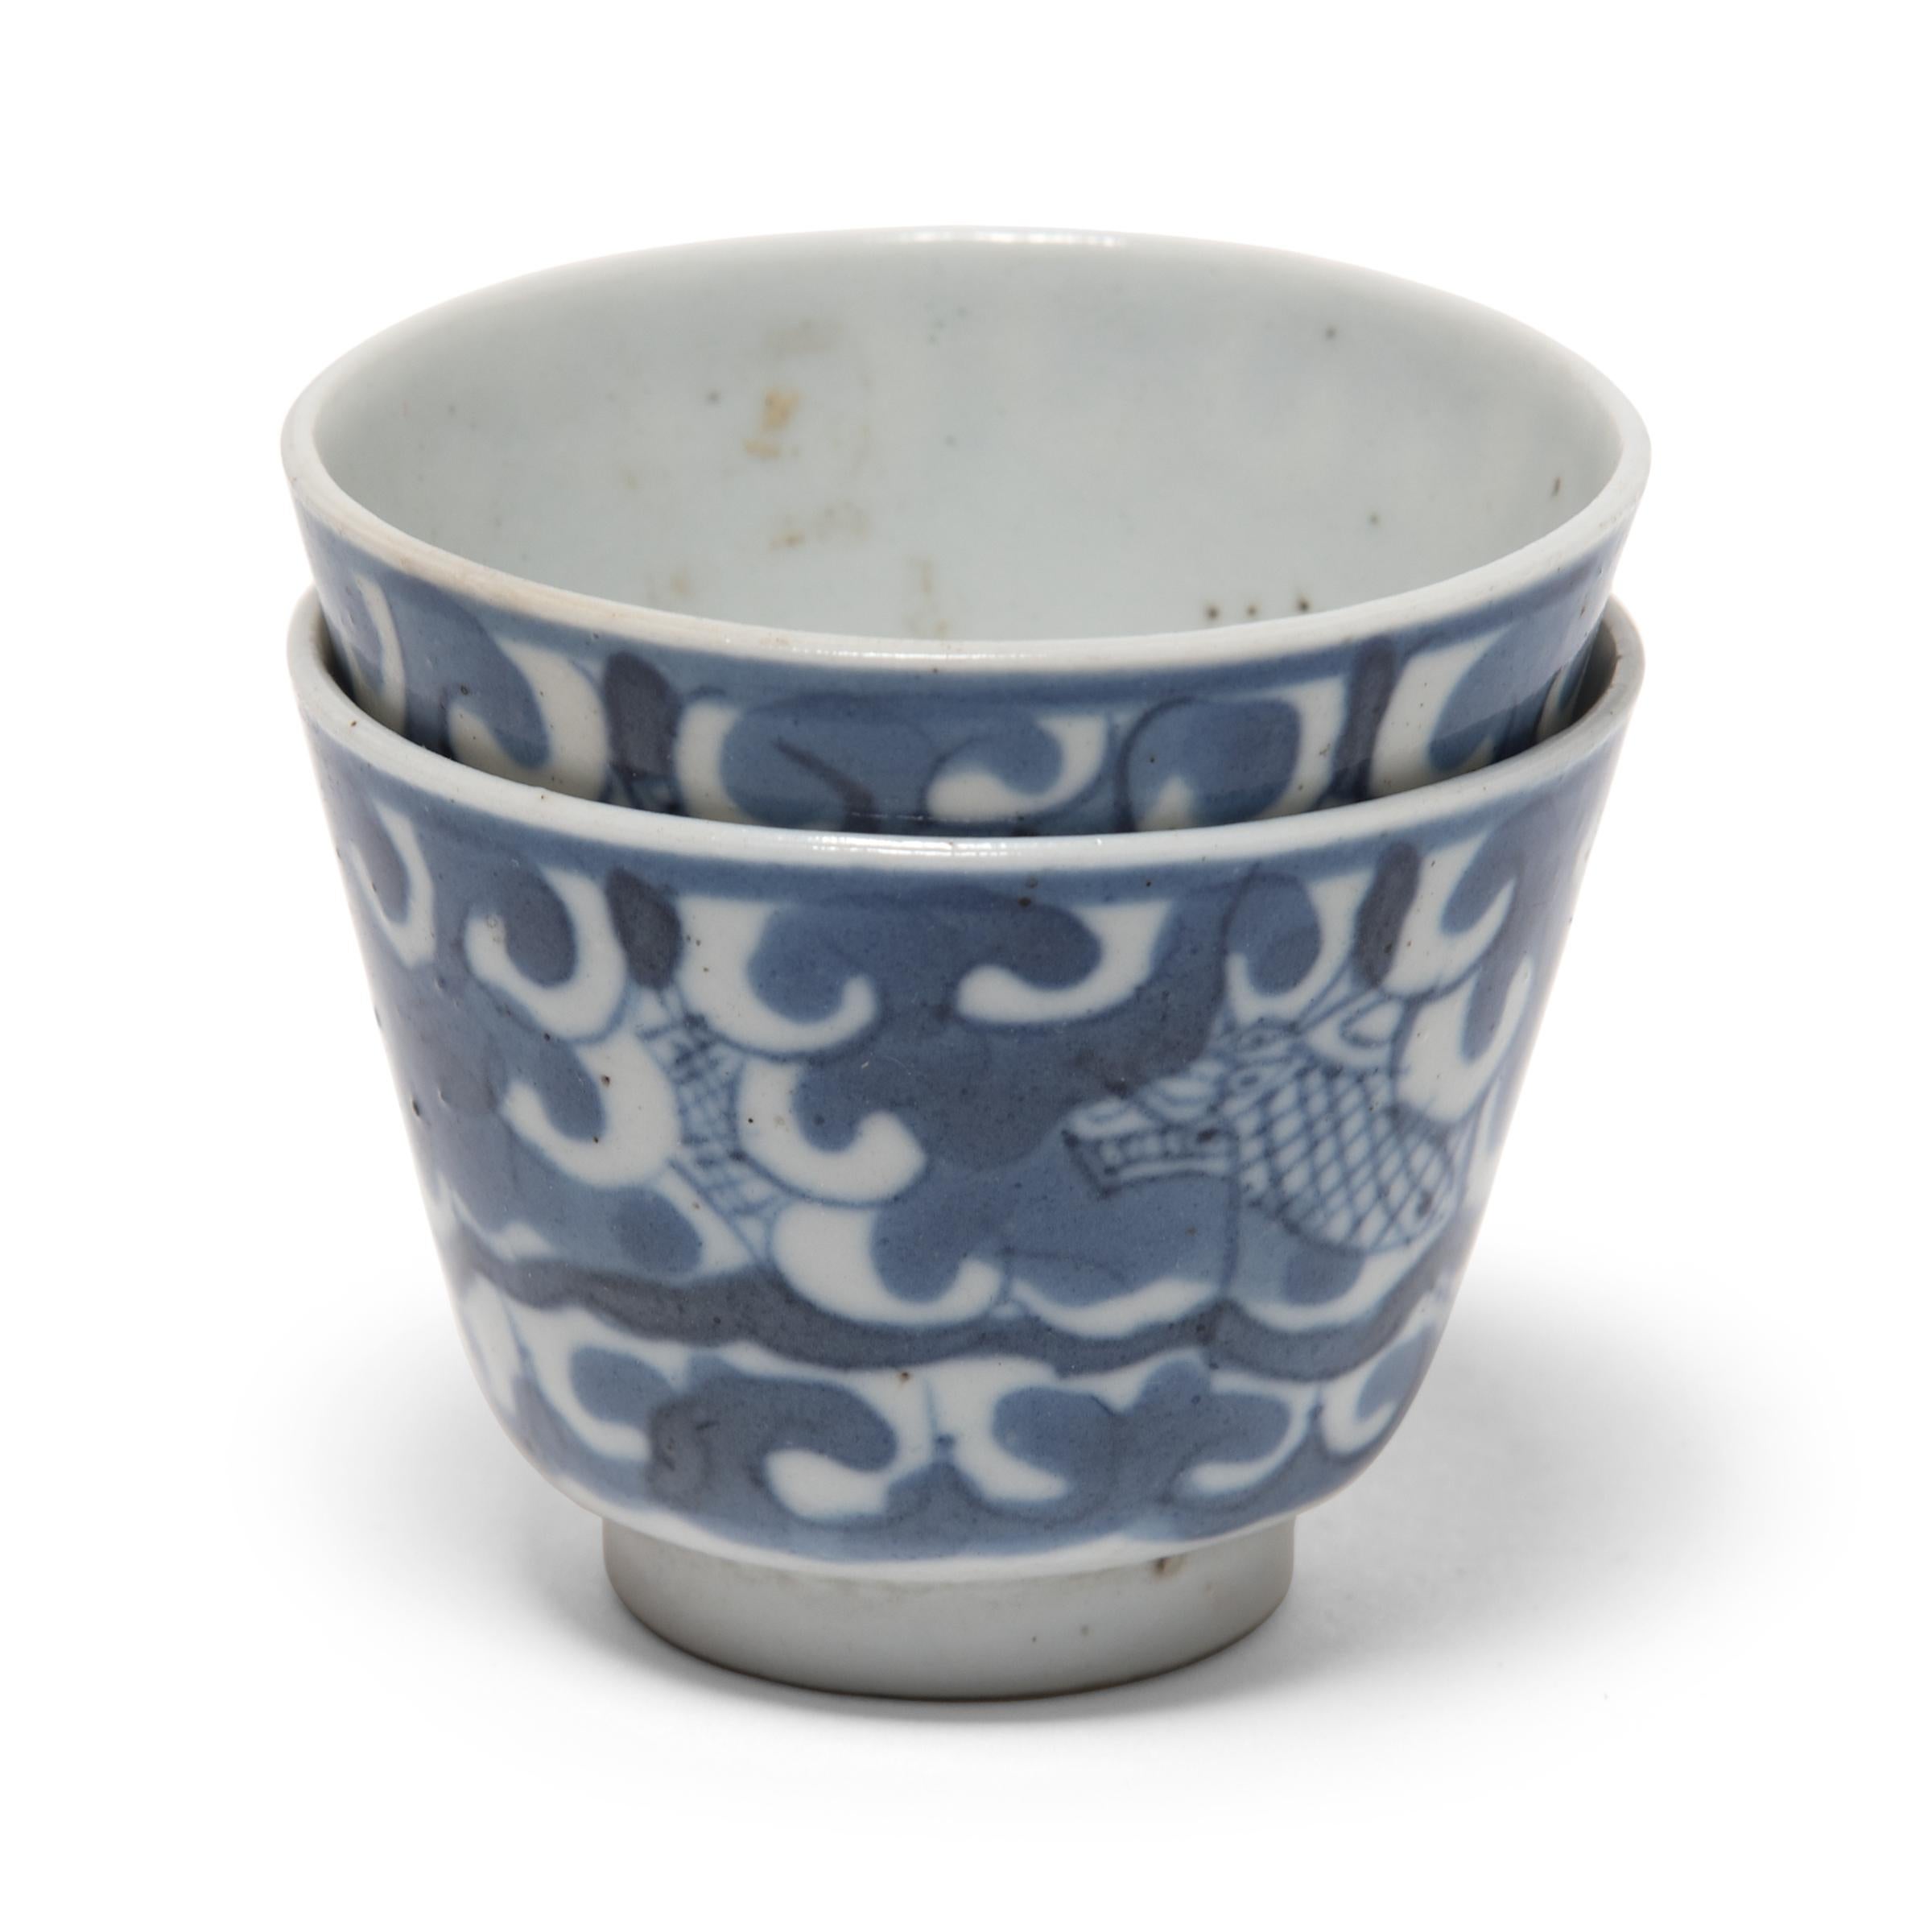 The blue and white design of these porcelain teacups was painted in a muted, grey pigment, only to be transformed to a rich, cobalt blue by the fiery heat of the kiln. Painted with a simple cross-hatch pattern, a serpentine dragon weaves its way